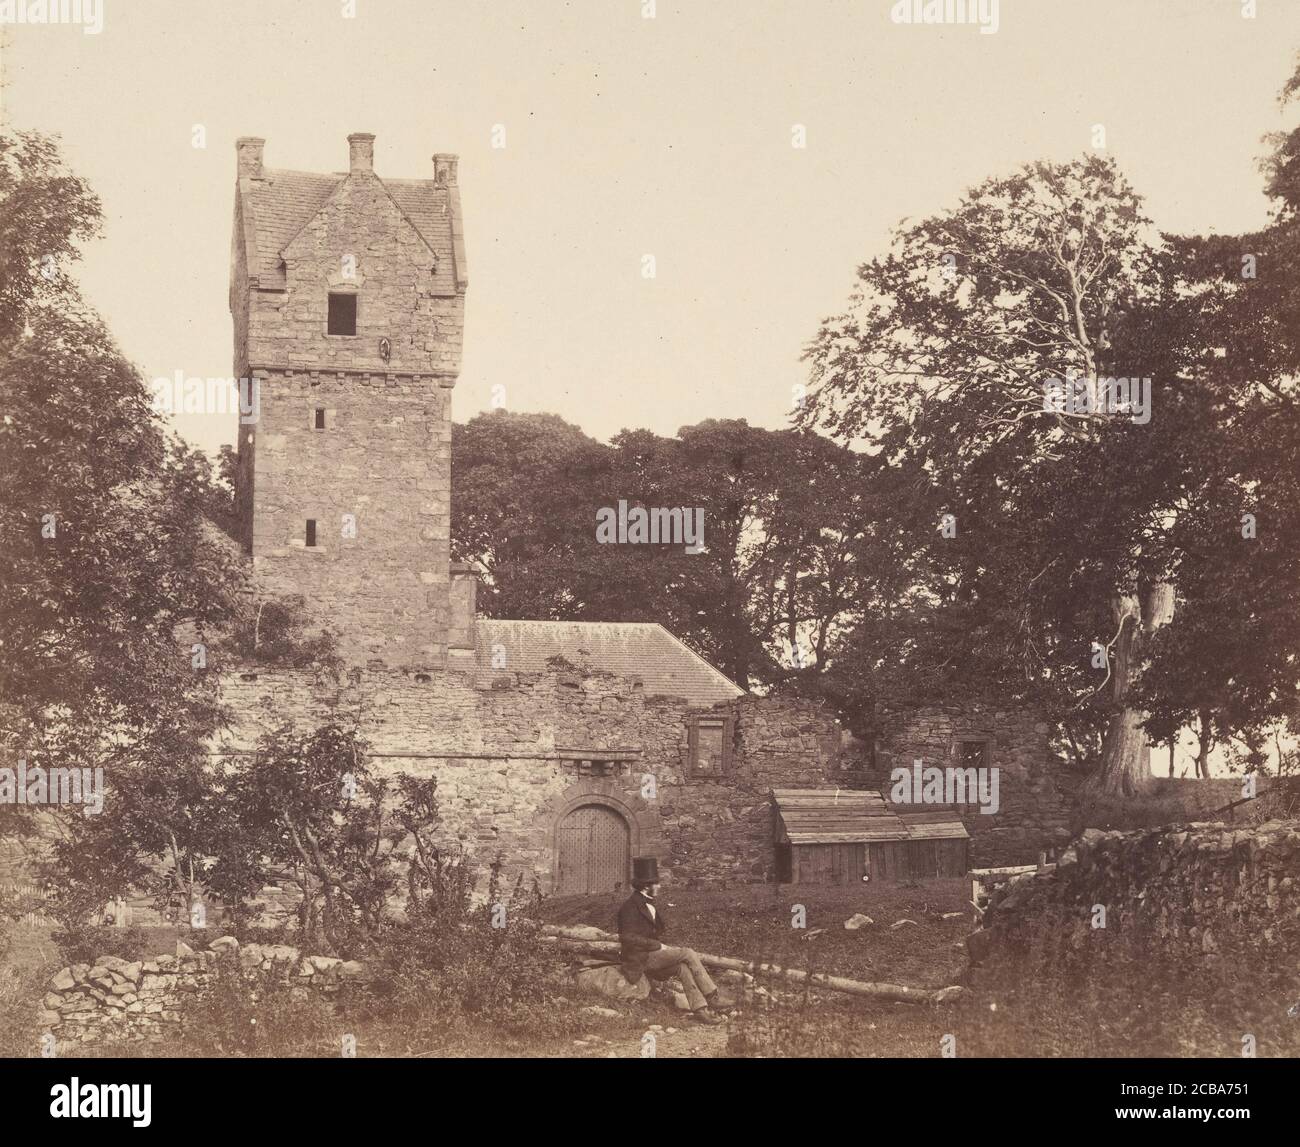 The Castle of the Mains, Forfarshire, 1856. Stock Photo